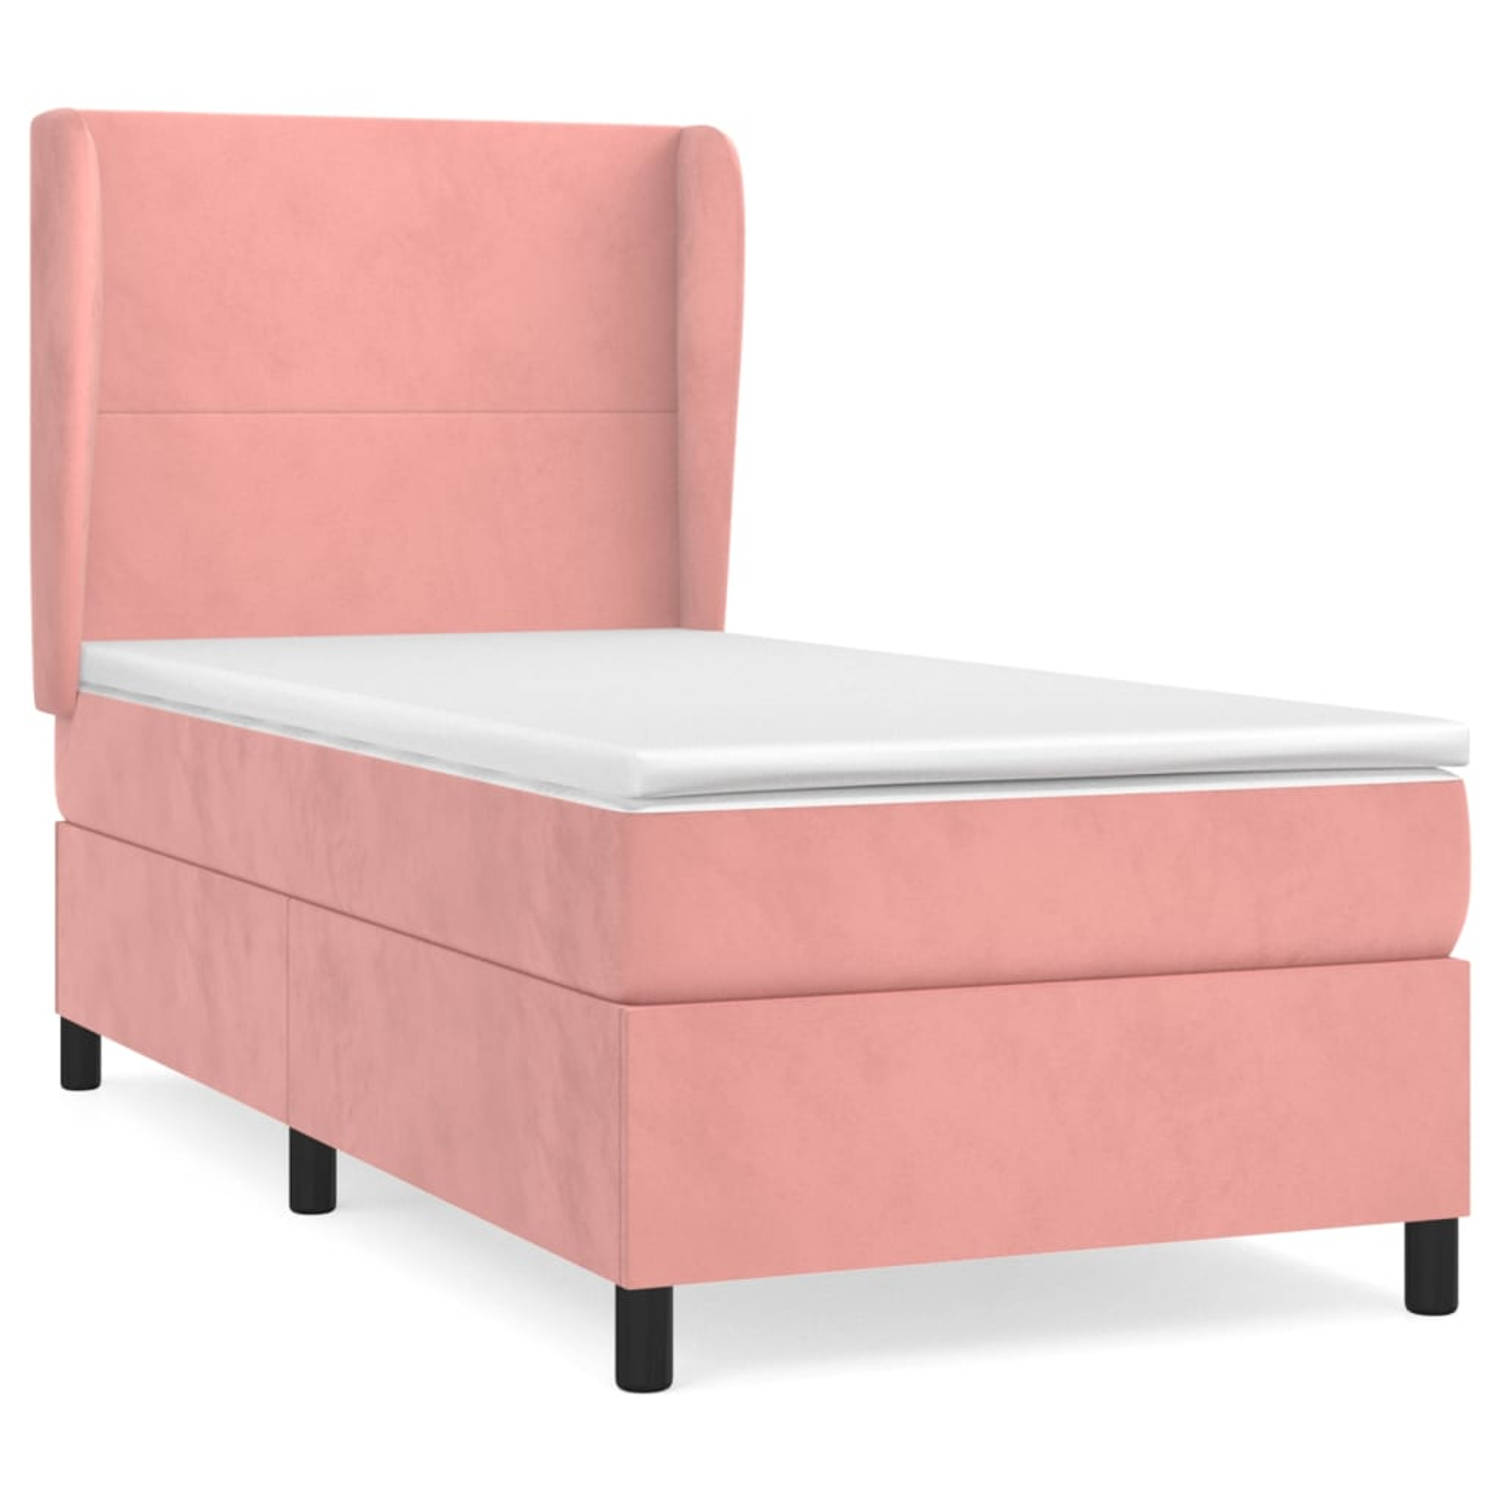 The Living Store Boxspringbed - Fluwelen - Bed - 203 x 103 x 118/128 cm - Roze